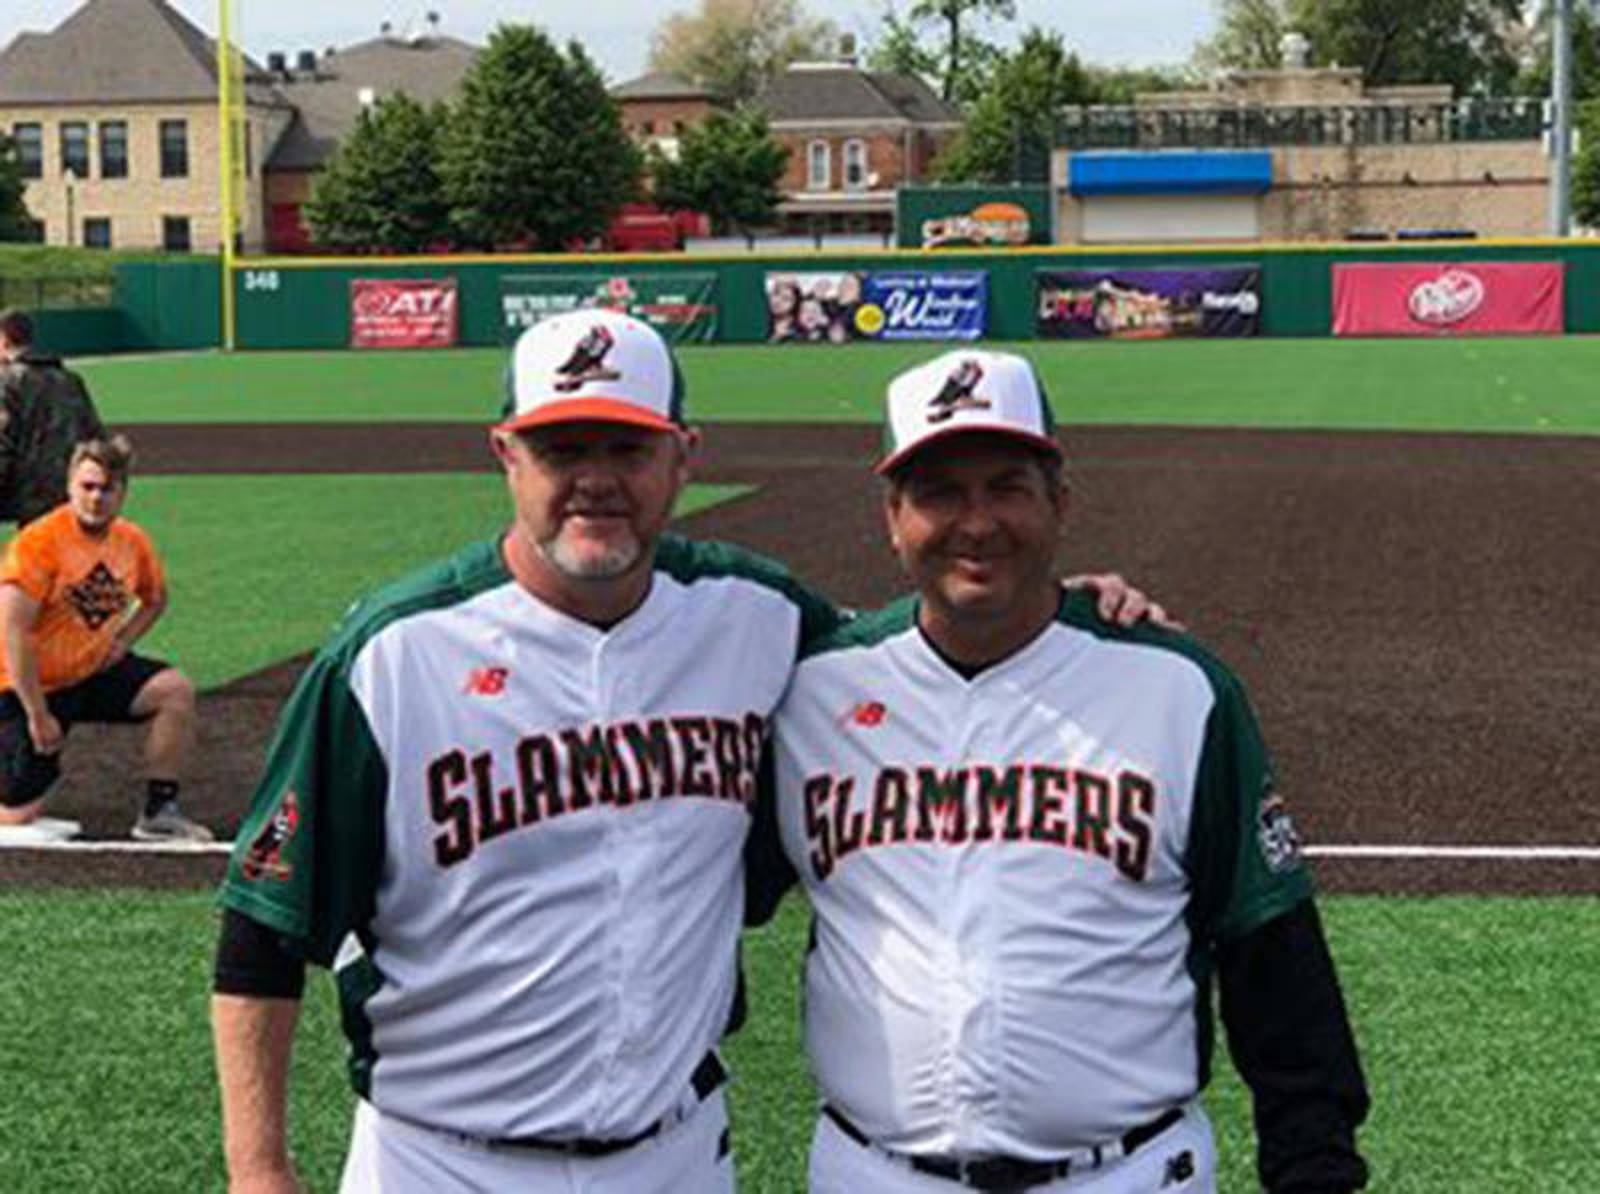 ExCoal City coach McDowell coaching for Joliet Slammers Shaw Local